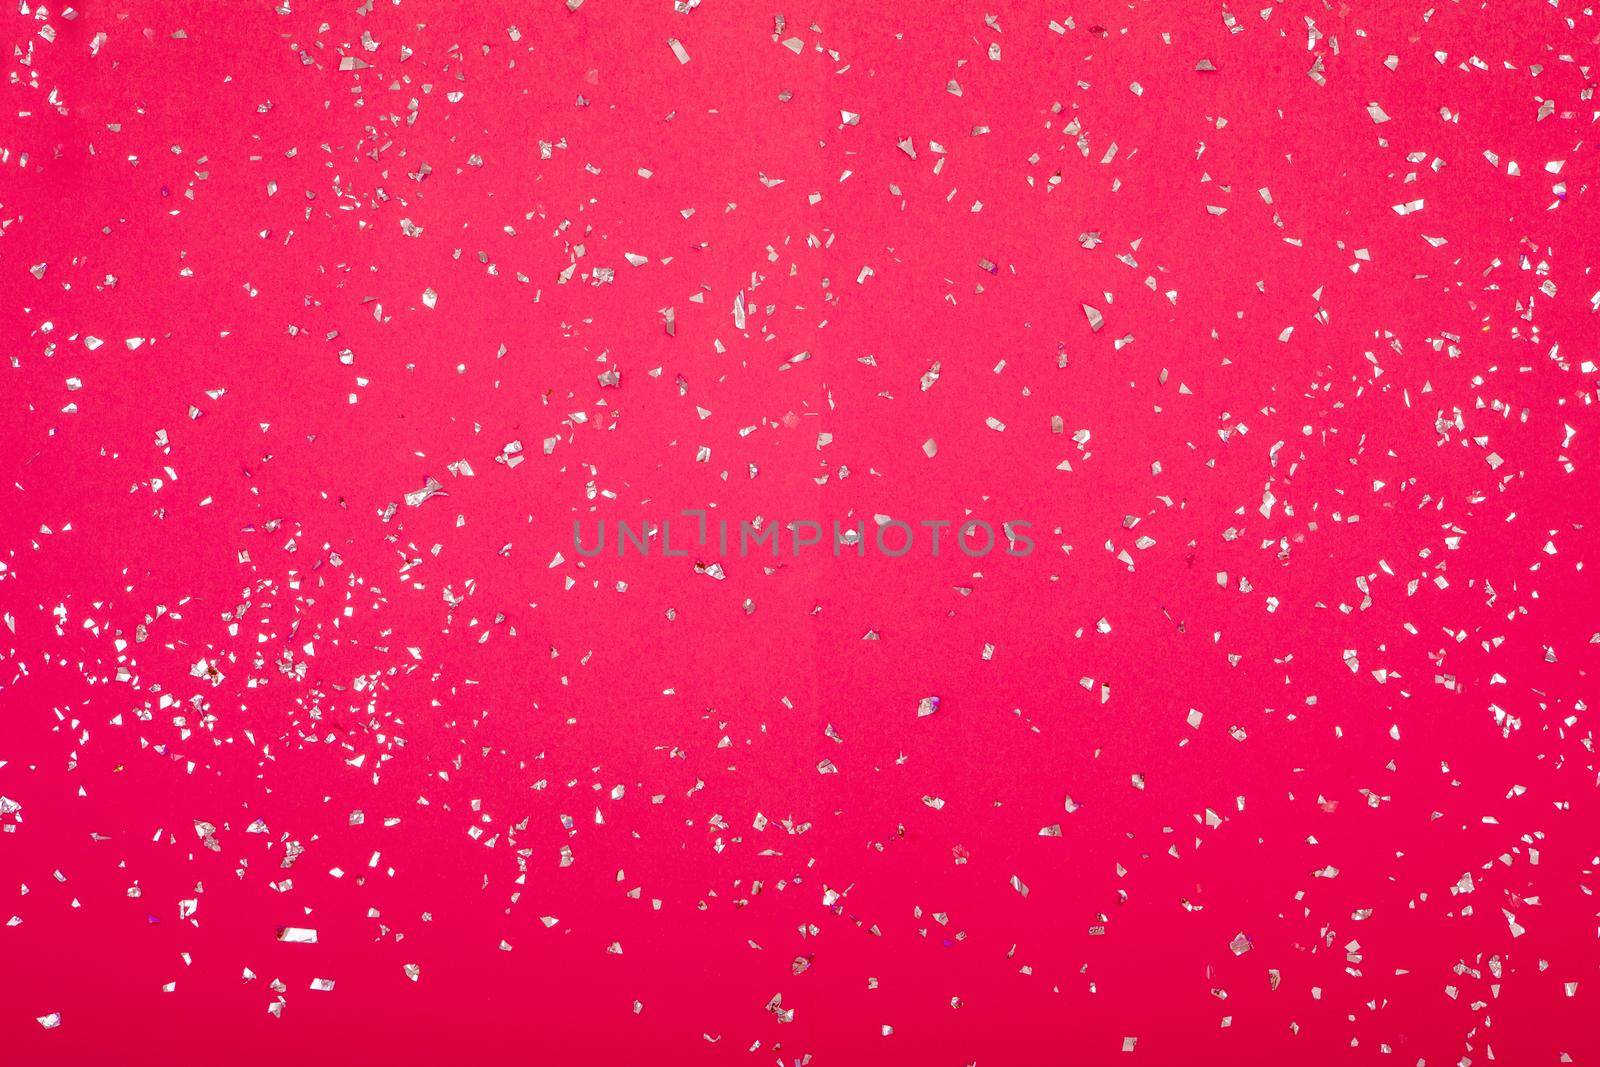 Silver sparkles scattered randomly on a pink background by Demkat